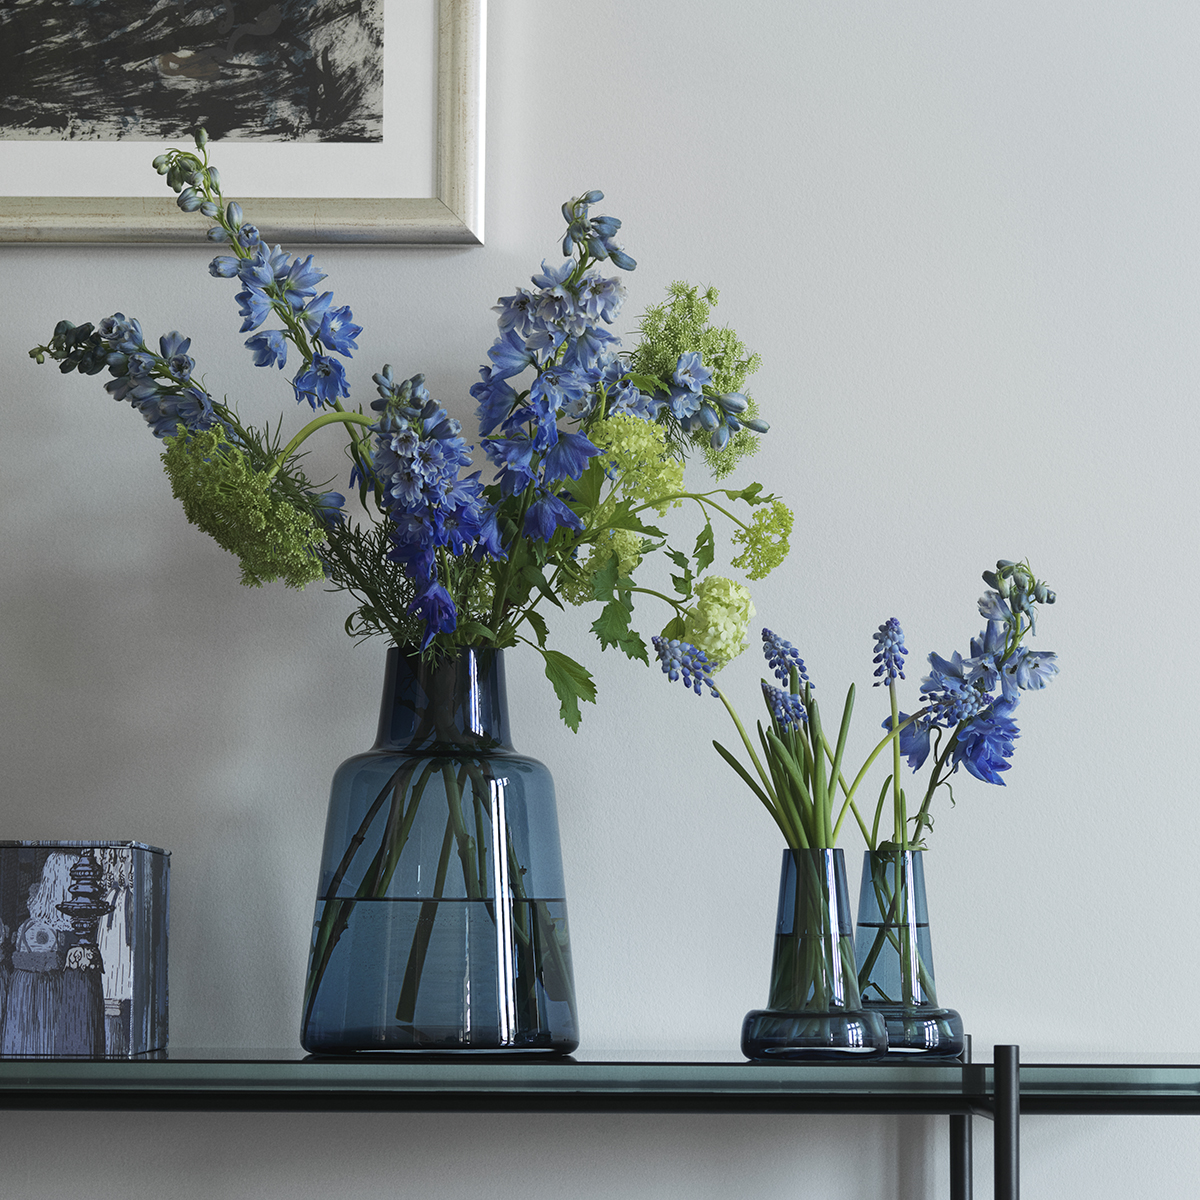 Holmegaard Flora Vase | The Container Store